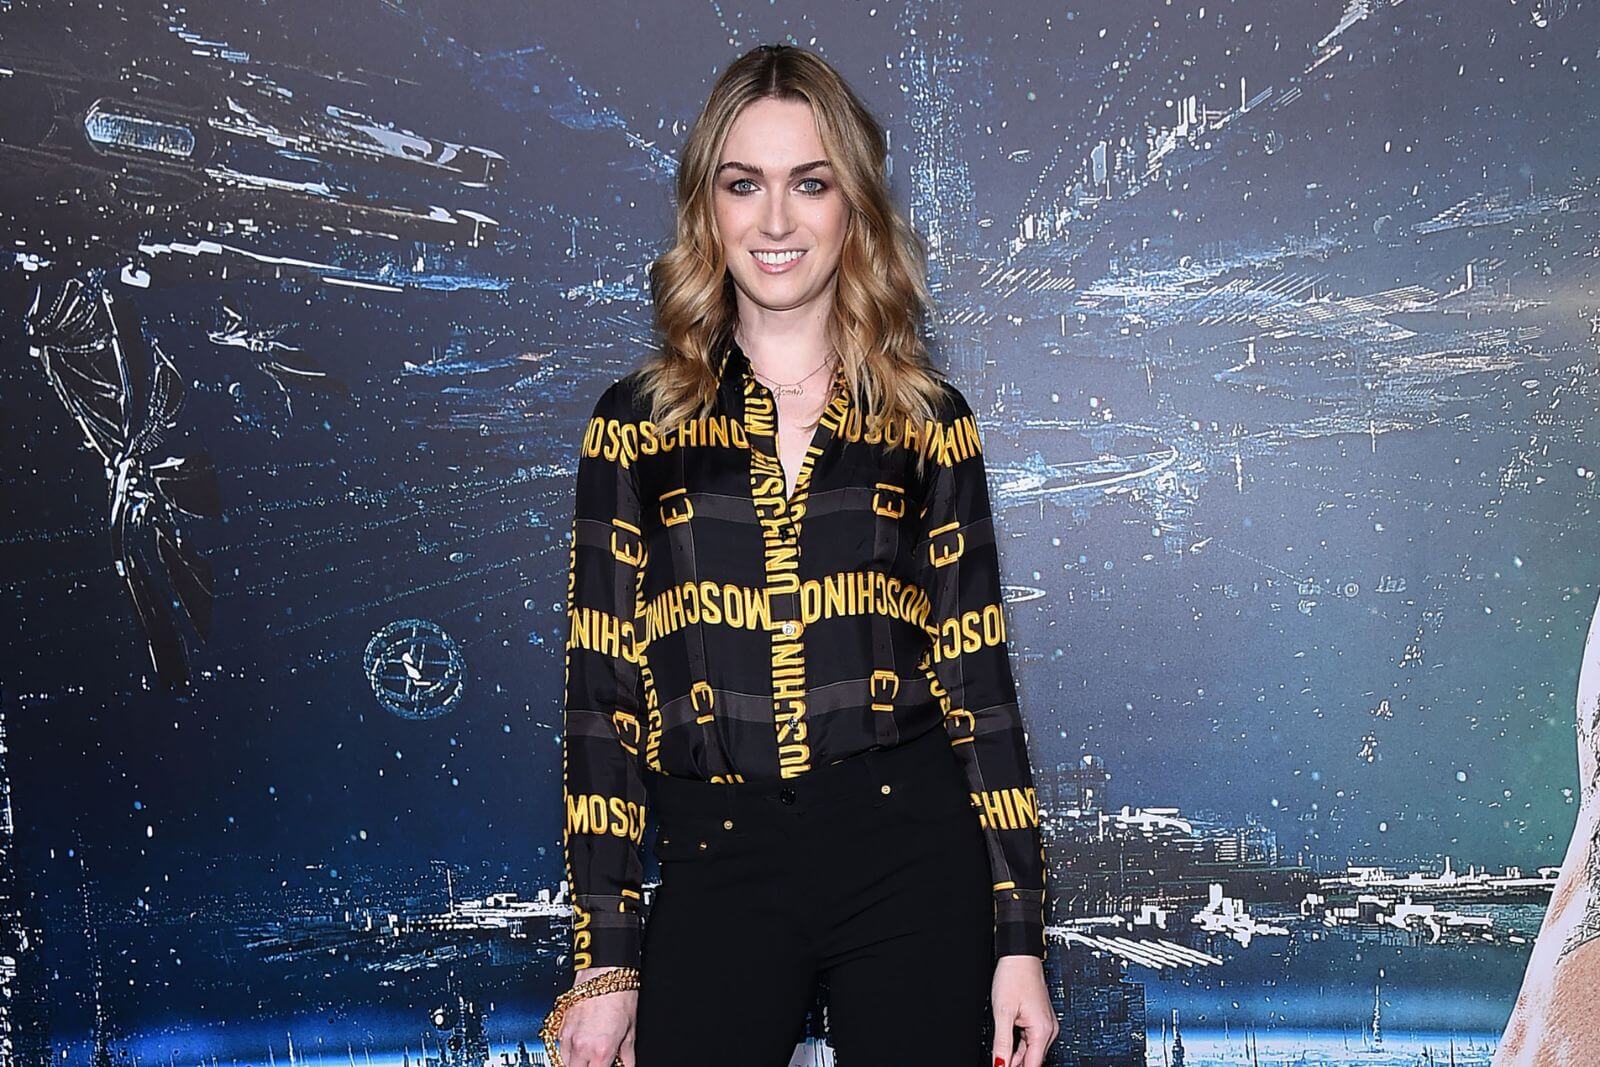 <p class="wp-caption-text">Image Credit: Shutterstock / DFree</p>  <p><span>Jamie Clayton’s performance in “Sense8” was hailed for its groundbreaking portrayal of a transgender character’s life and relationships. Clayton has spoken out against Hollywood’s casting practices and the need for authentic transgender representation, challenging the industry to evolve.</span></p>